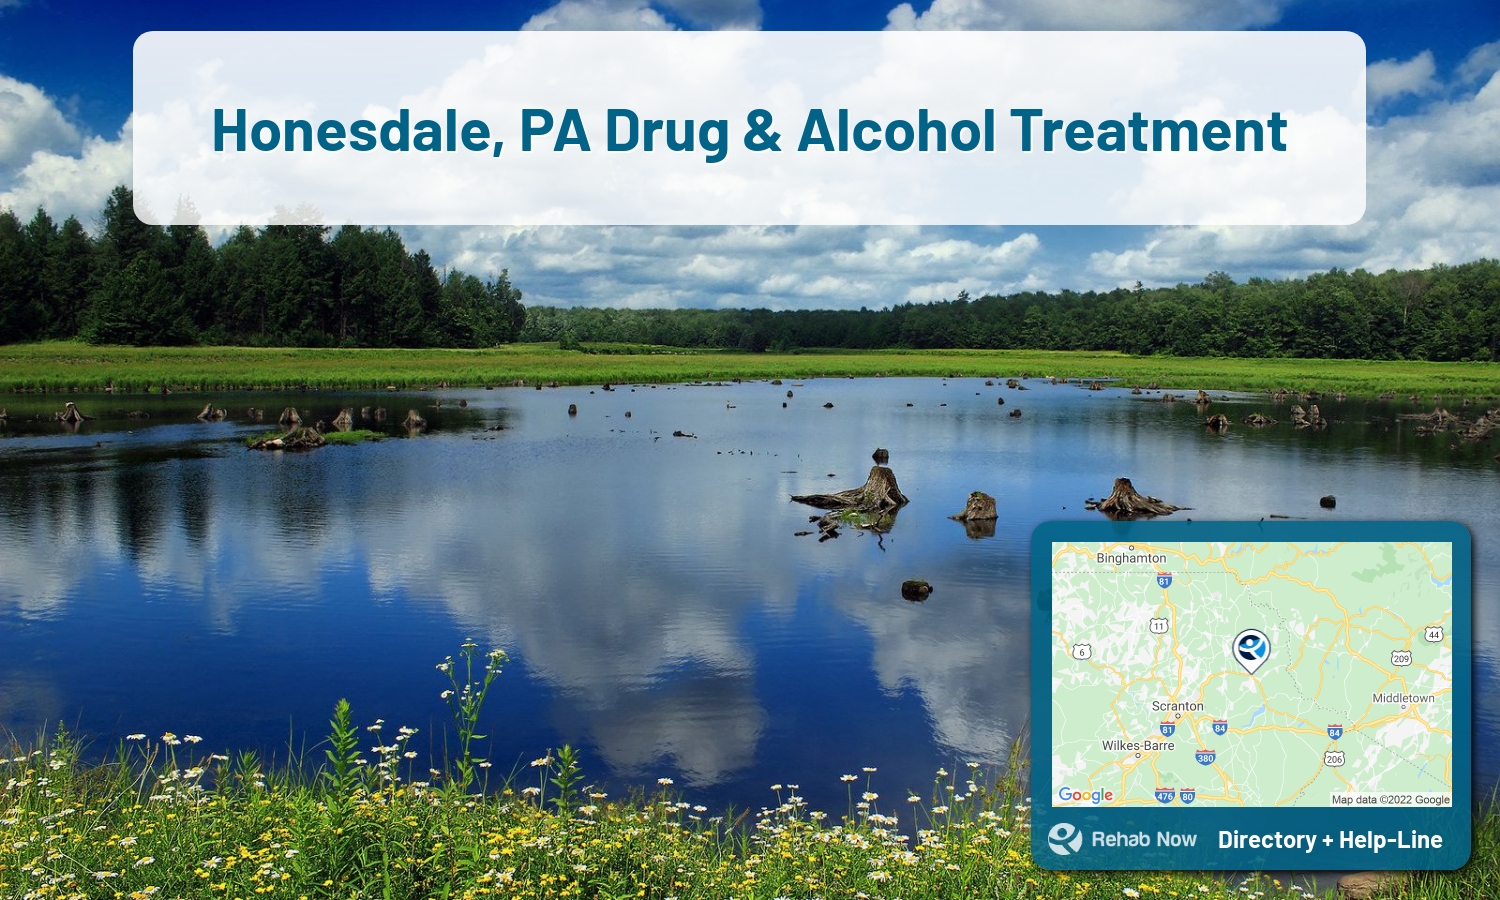 Honesdale, PA Treatment Centers. Find drug rehab in Honesdale, Pennsylvania, or detox and treatment programs. Get the right help now!